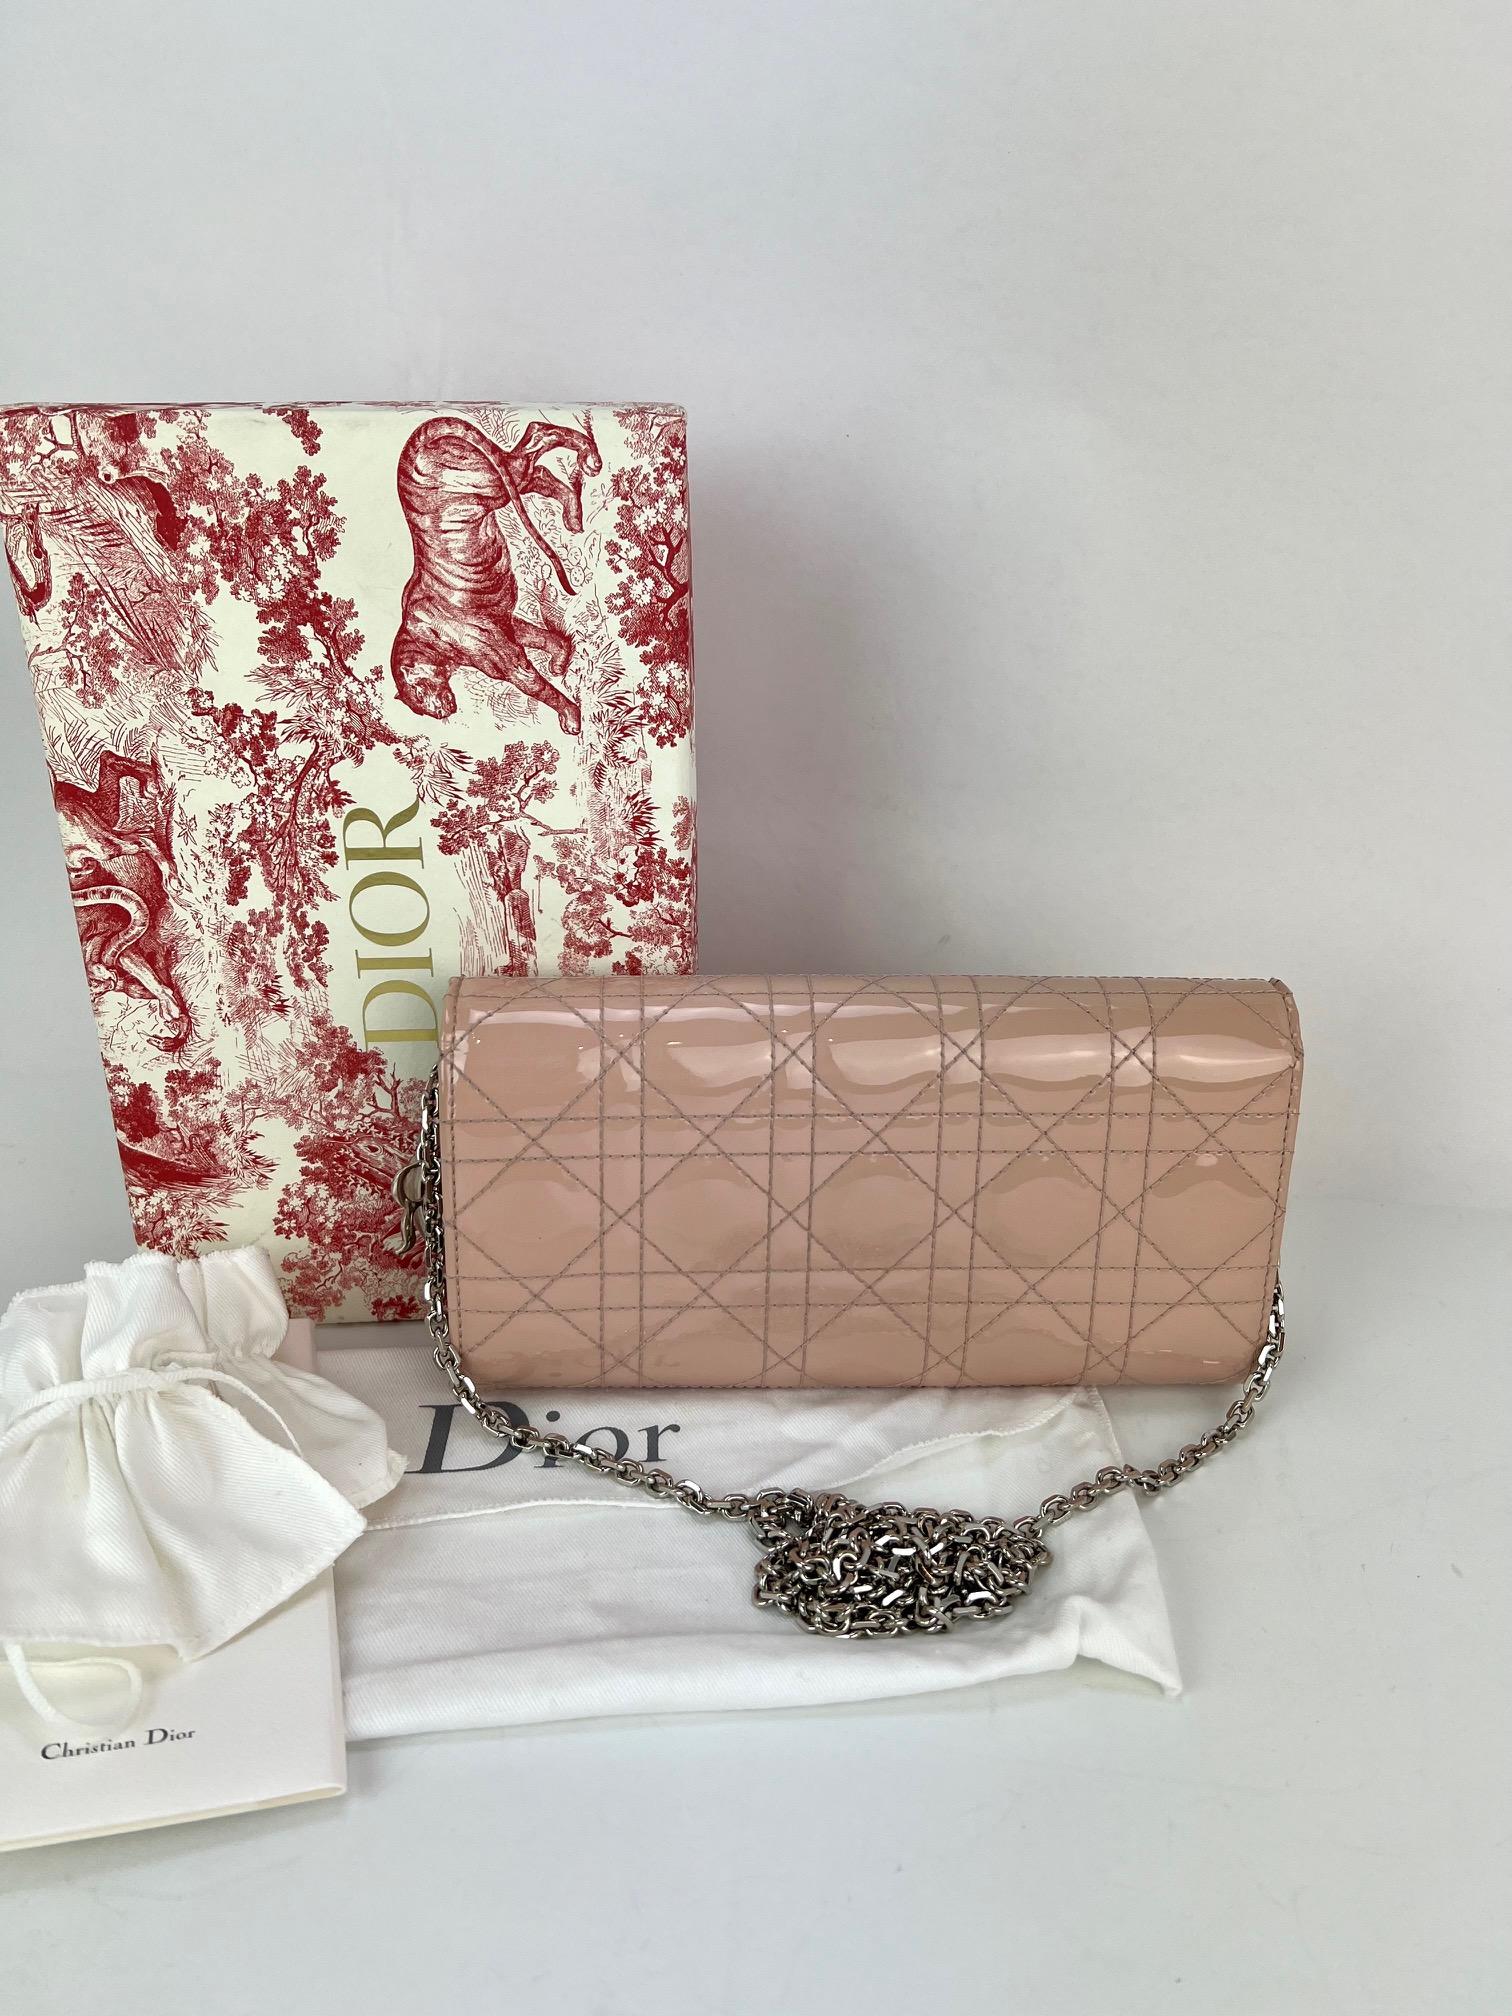 Pre-Owned  100% Authentic
Lady Dior Pouch Pink Patent Leather Cannage Wallet on a Chain Clutch 
RATING: A/B...Very Good, well maintained, 
shows minor signs of wear
MATERIAL: patent leather, calfskin
STRAP: Dior removable silver chain 48''